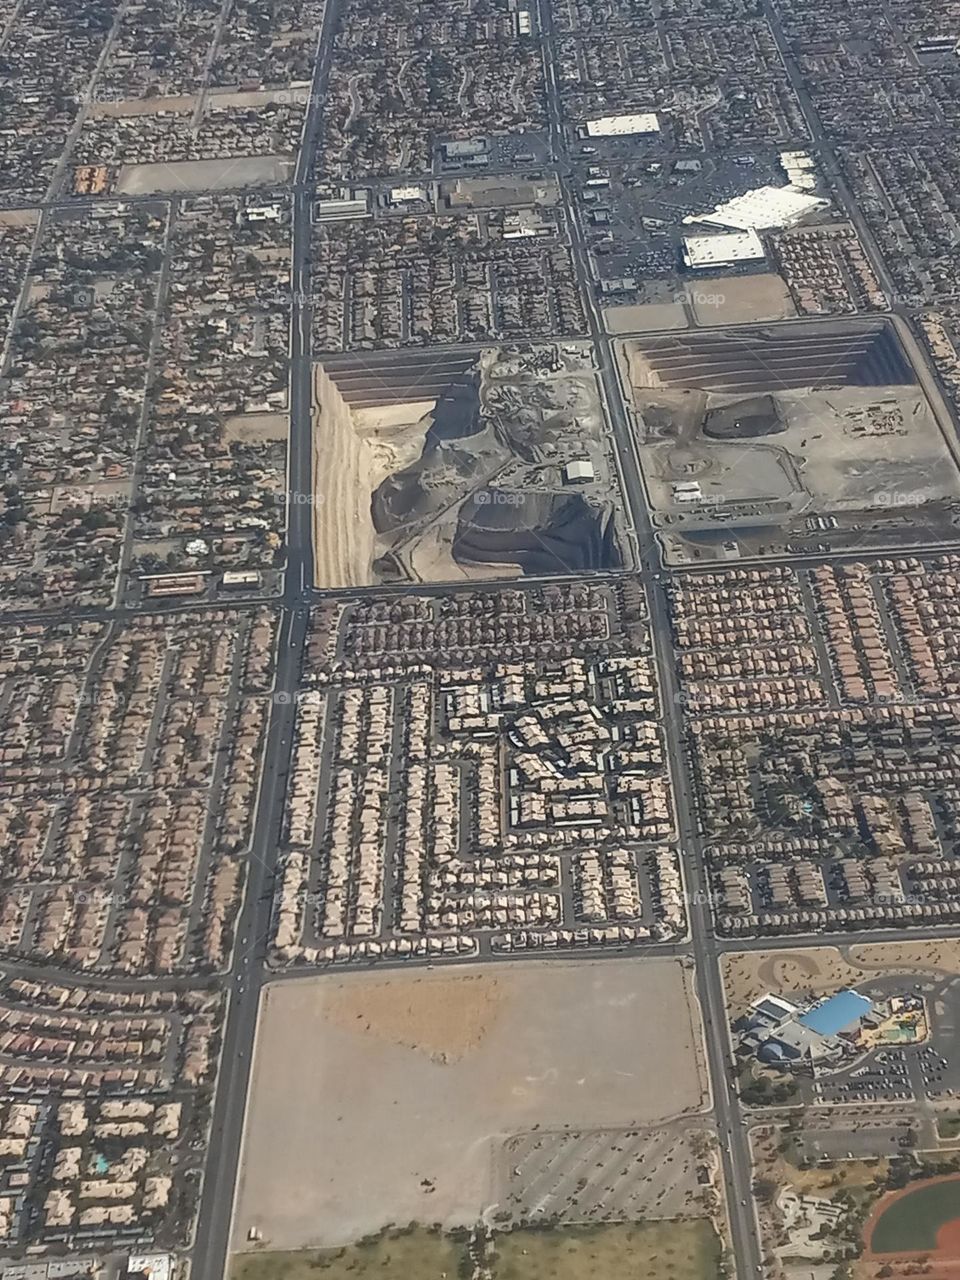 Las Vegas city view from an airplane